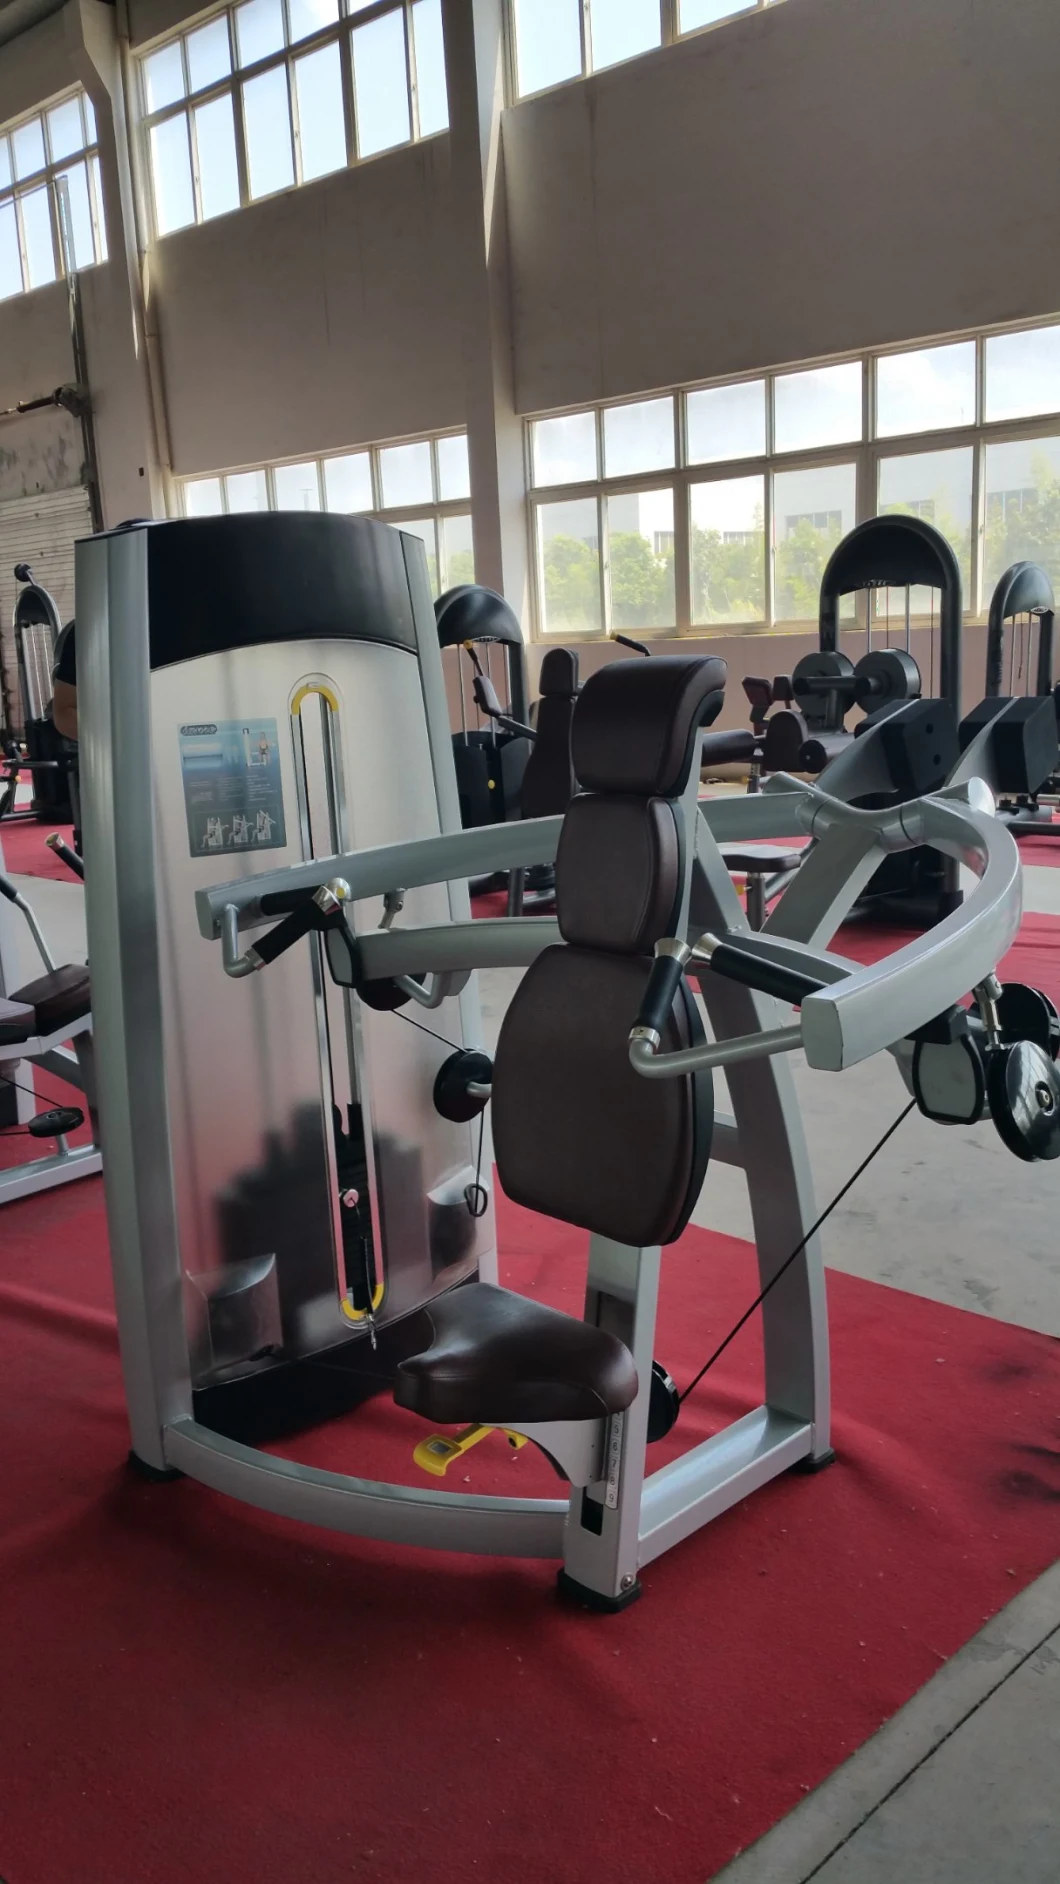 High Quality Popular Body Building Sport Equipment Training Gym Fitness Exercise Machine Butterfly